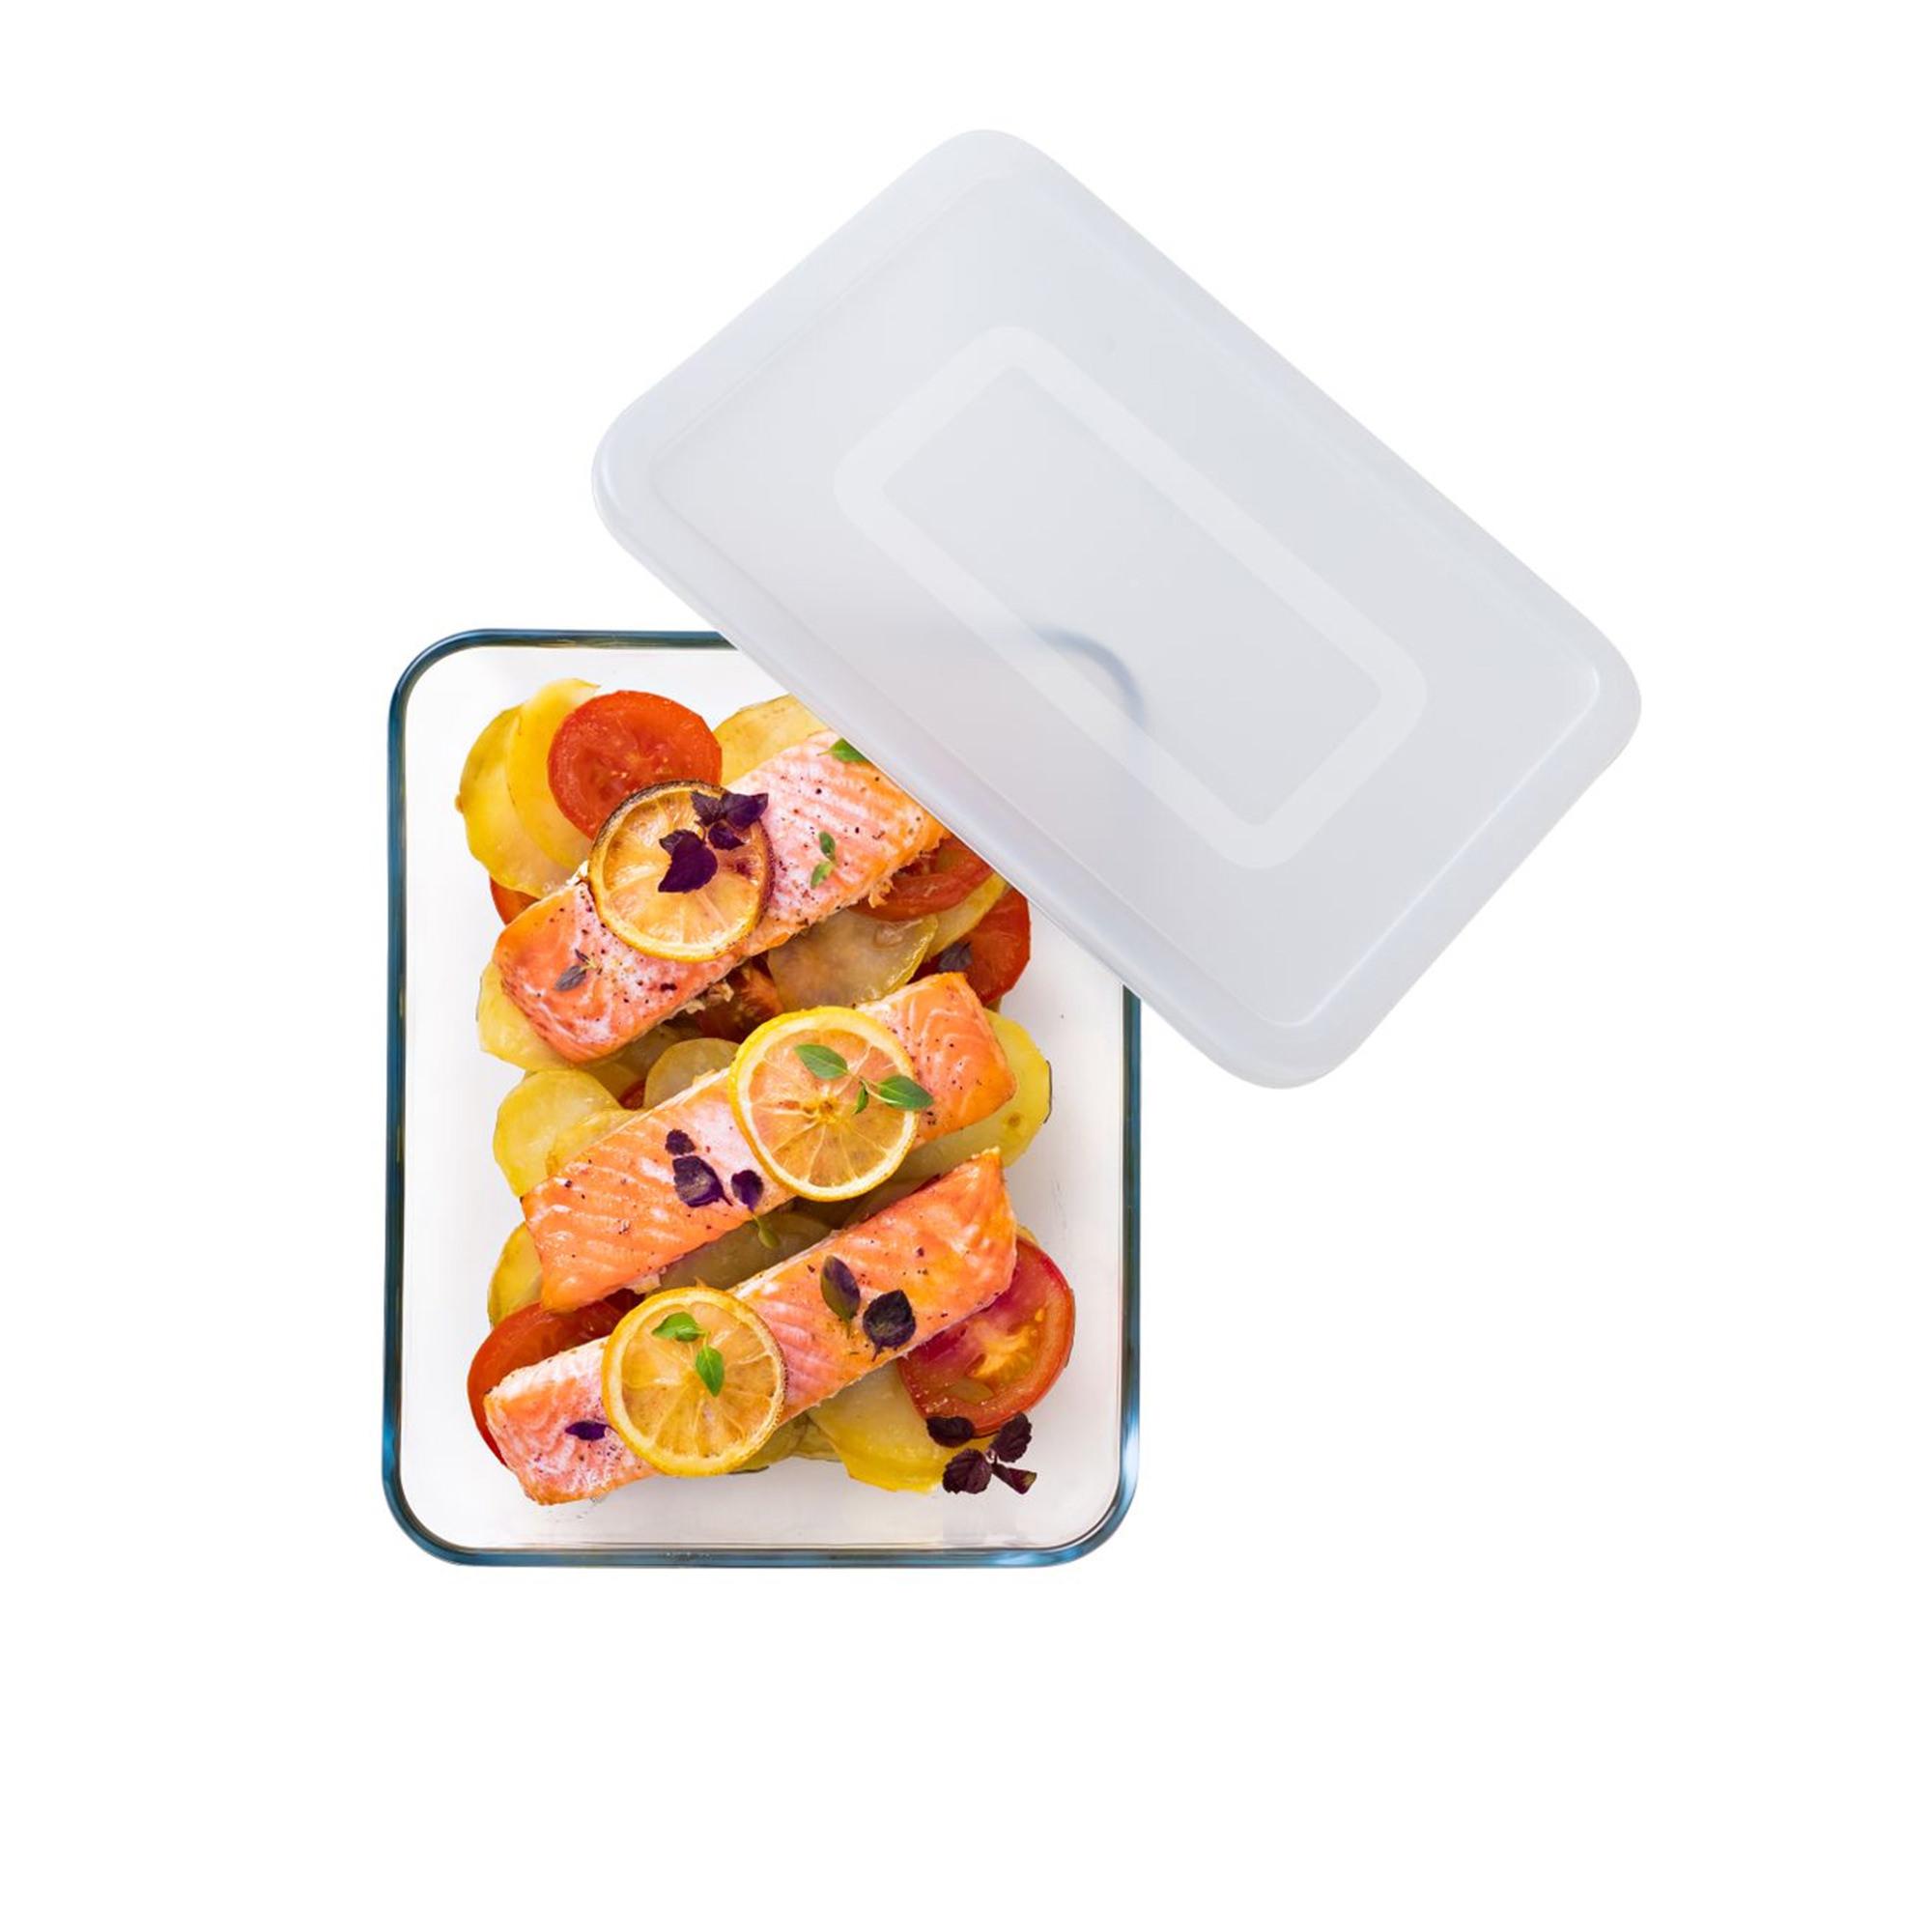 O' Cuisine Rectangular Glass Food Storage Container 1.3L Image 5